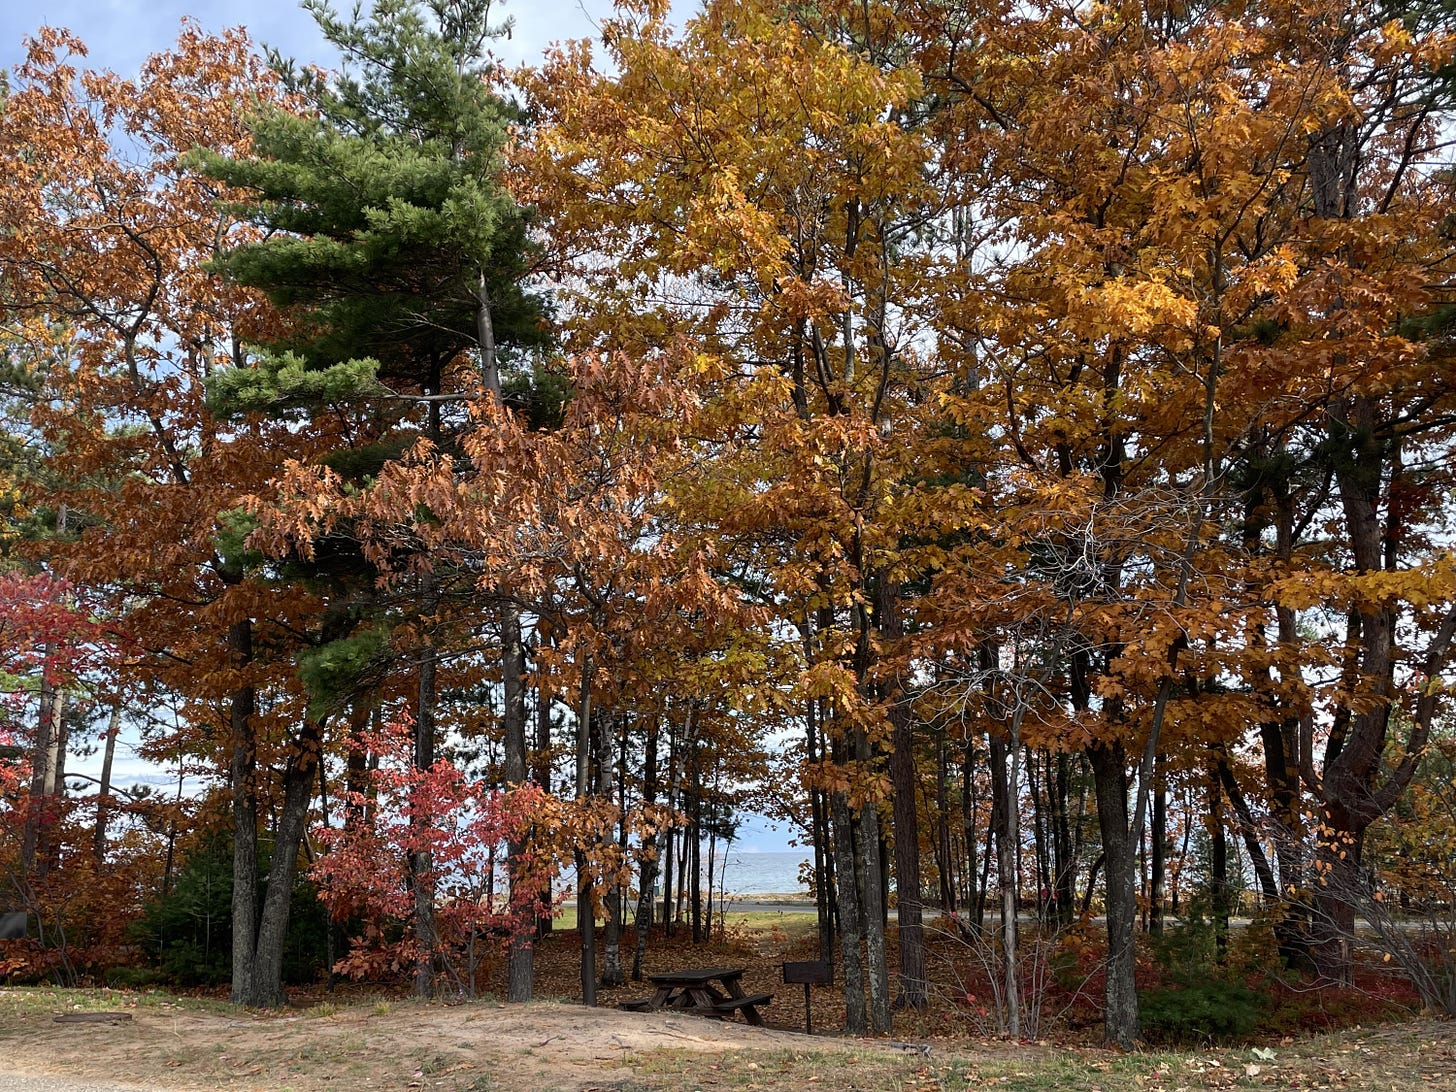 Autumn trees lining a lakeshore